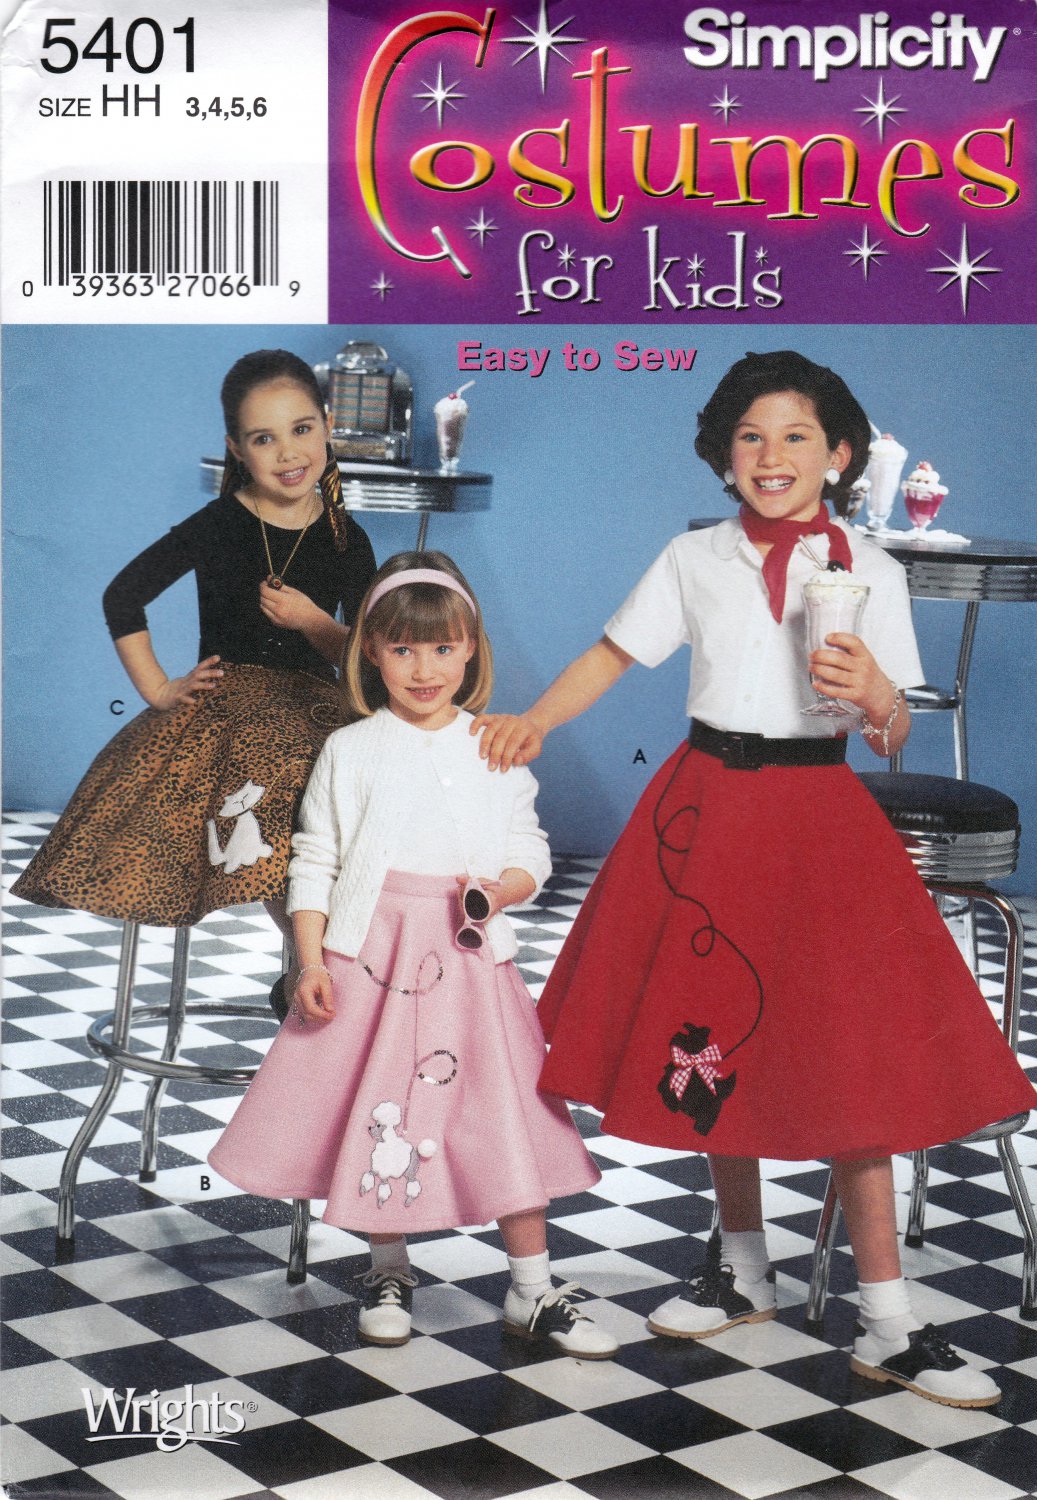 Simplicity 5401 Childs Poodle Skirts Costumes Sewing Pattern Sizes 3-4-5-6